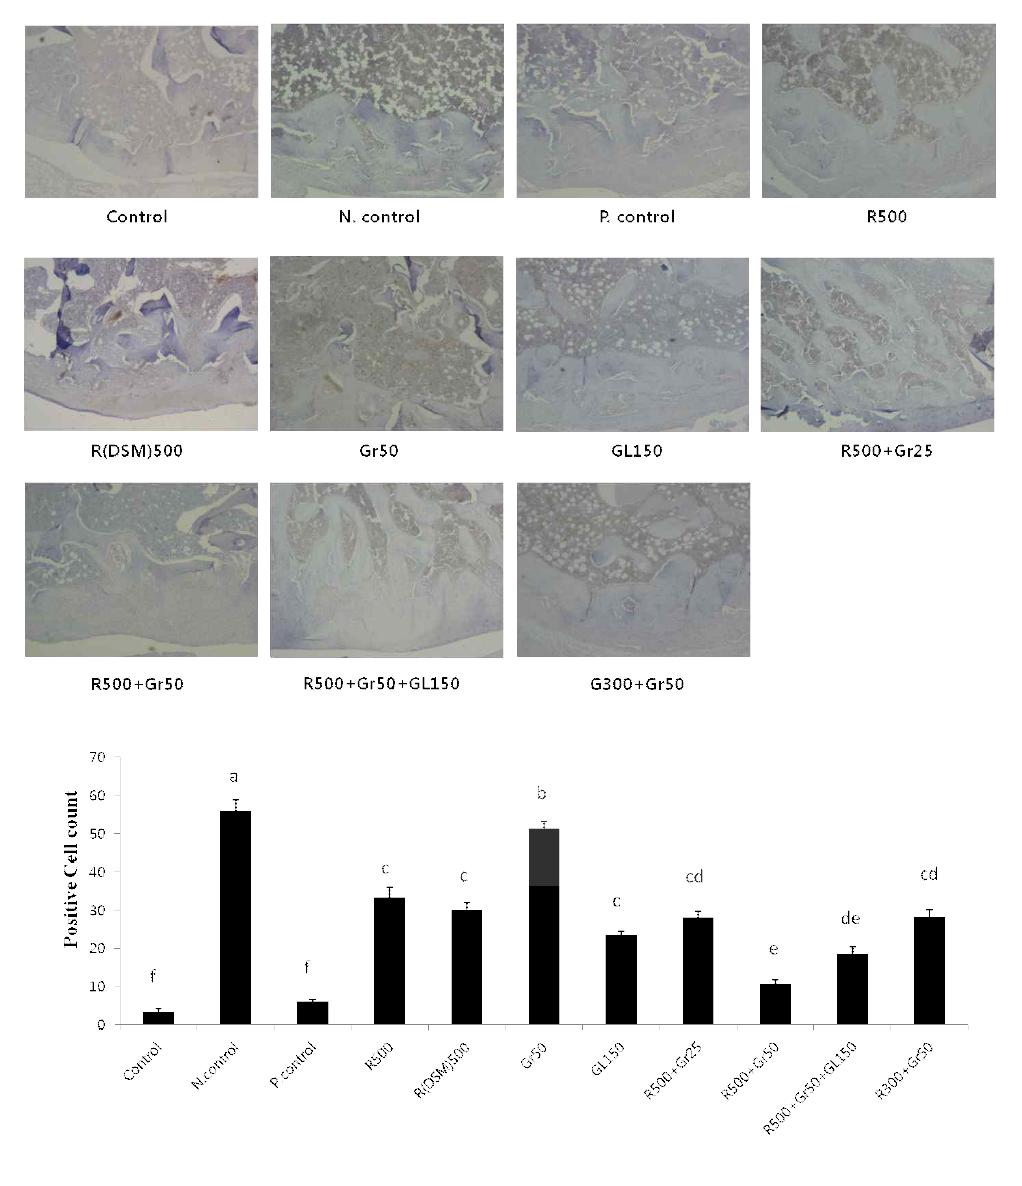 Immunohistochemical analysis of the iNOS expression after treatment in MIA-induced arthritis.